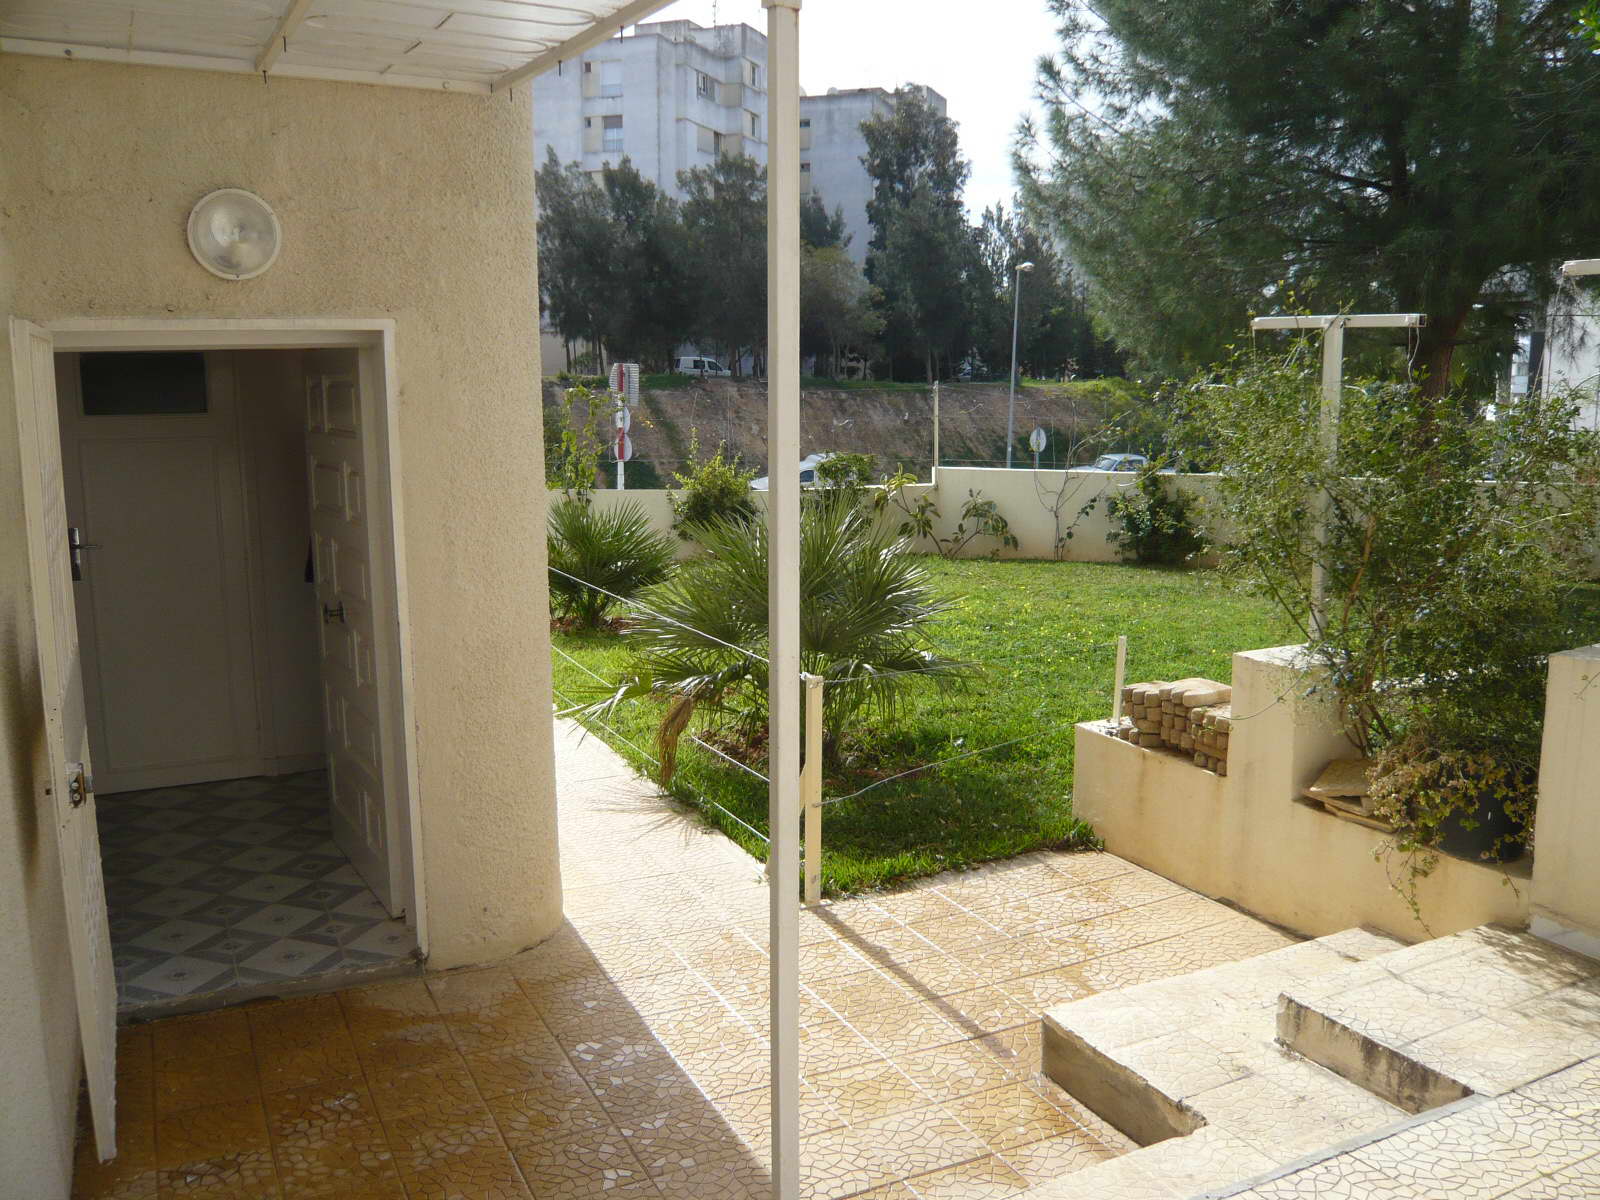 images_immo/tunis_immobilier111026d2.jpg